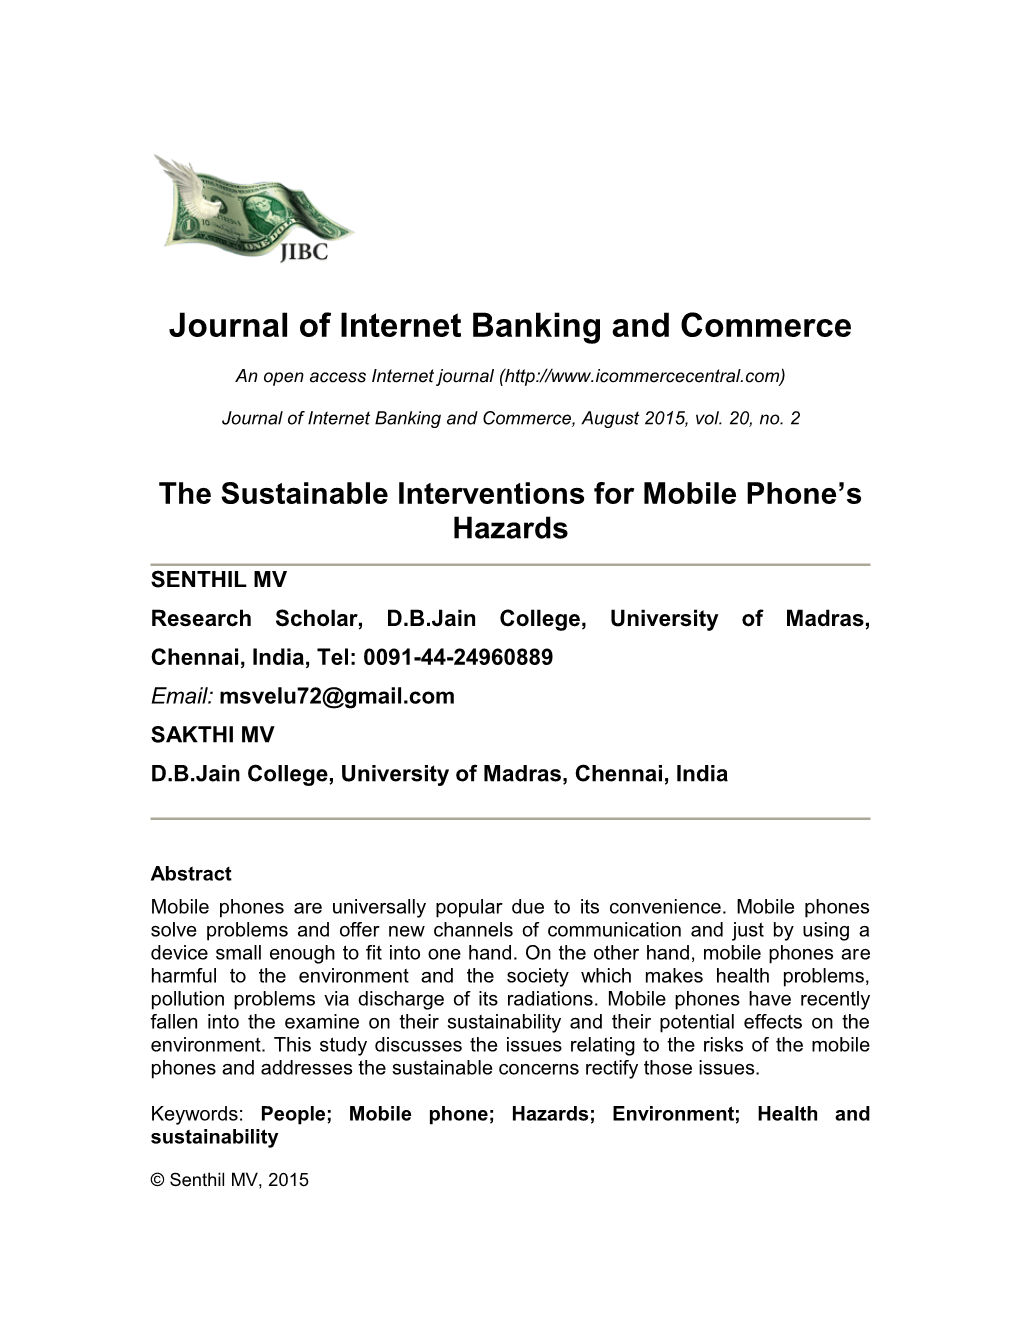 The Sustainable Interventions for Mobile Phone's Hazards